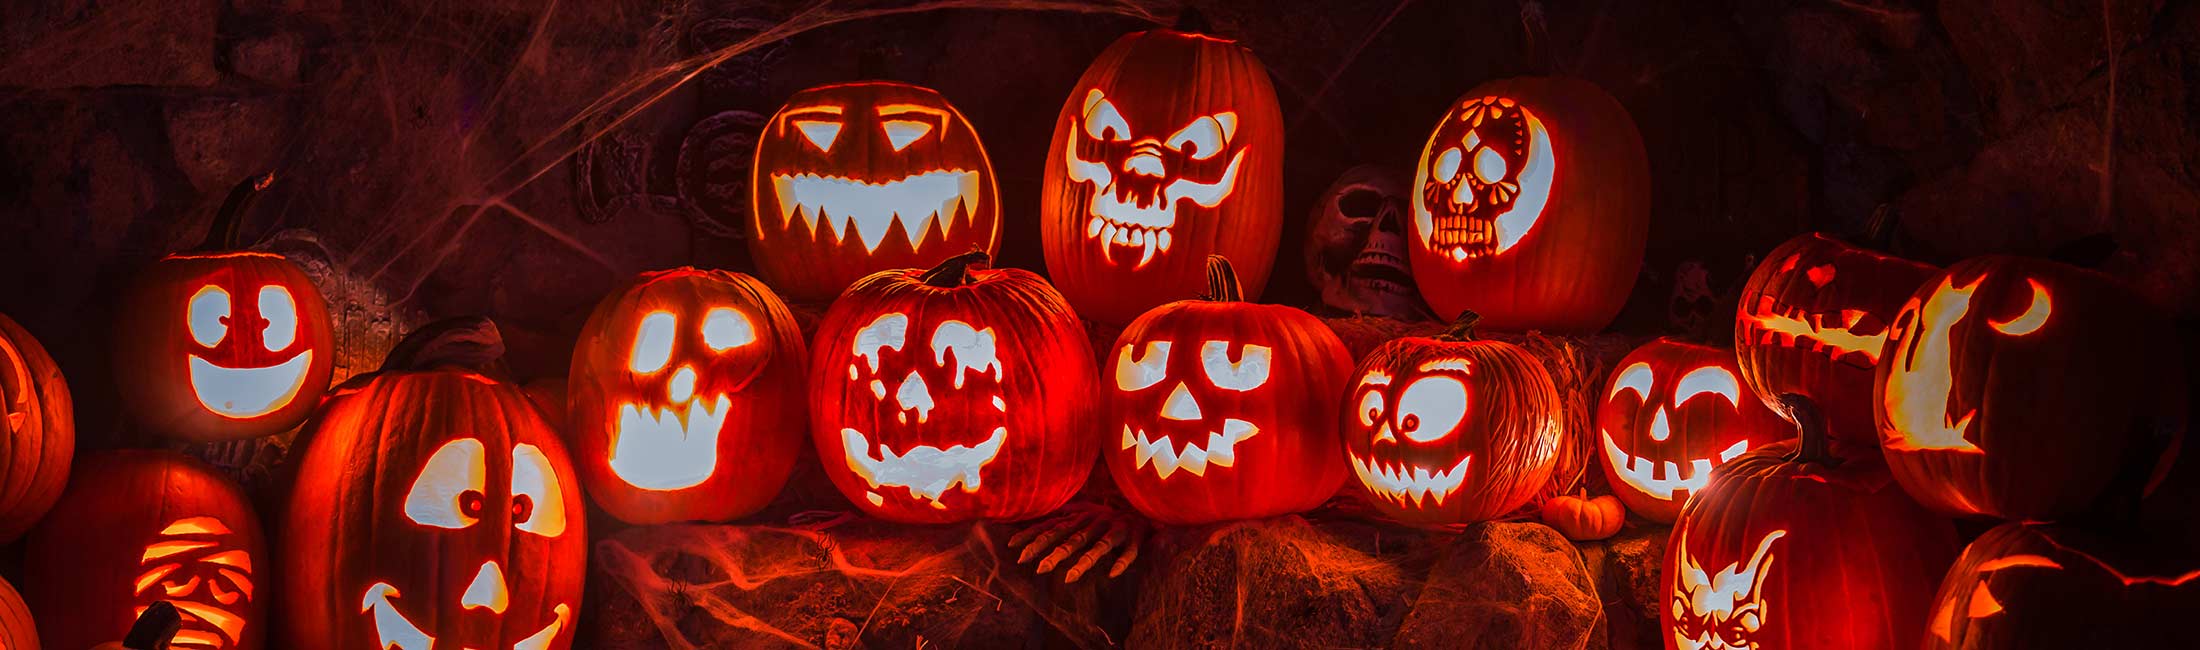 Get in the Halloween Spirit with These Spooky Missoula Events